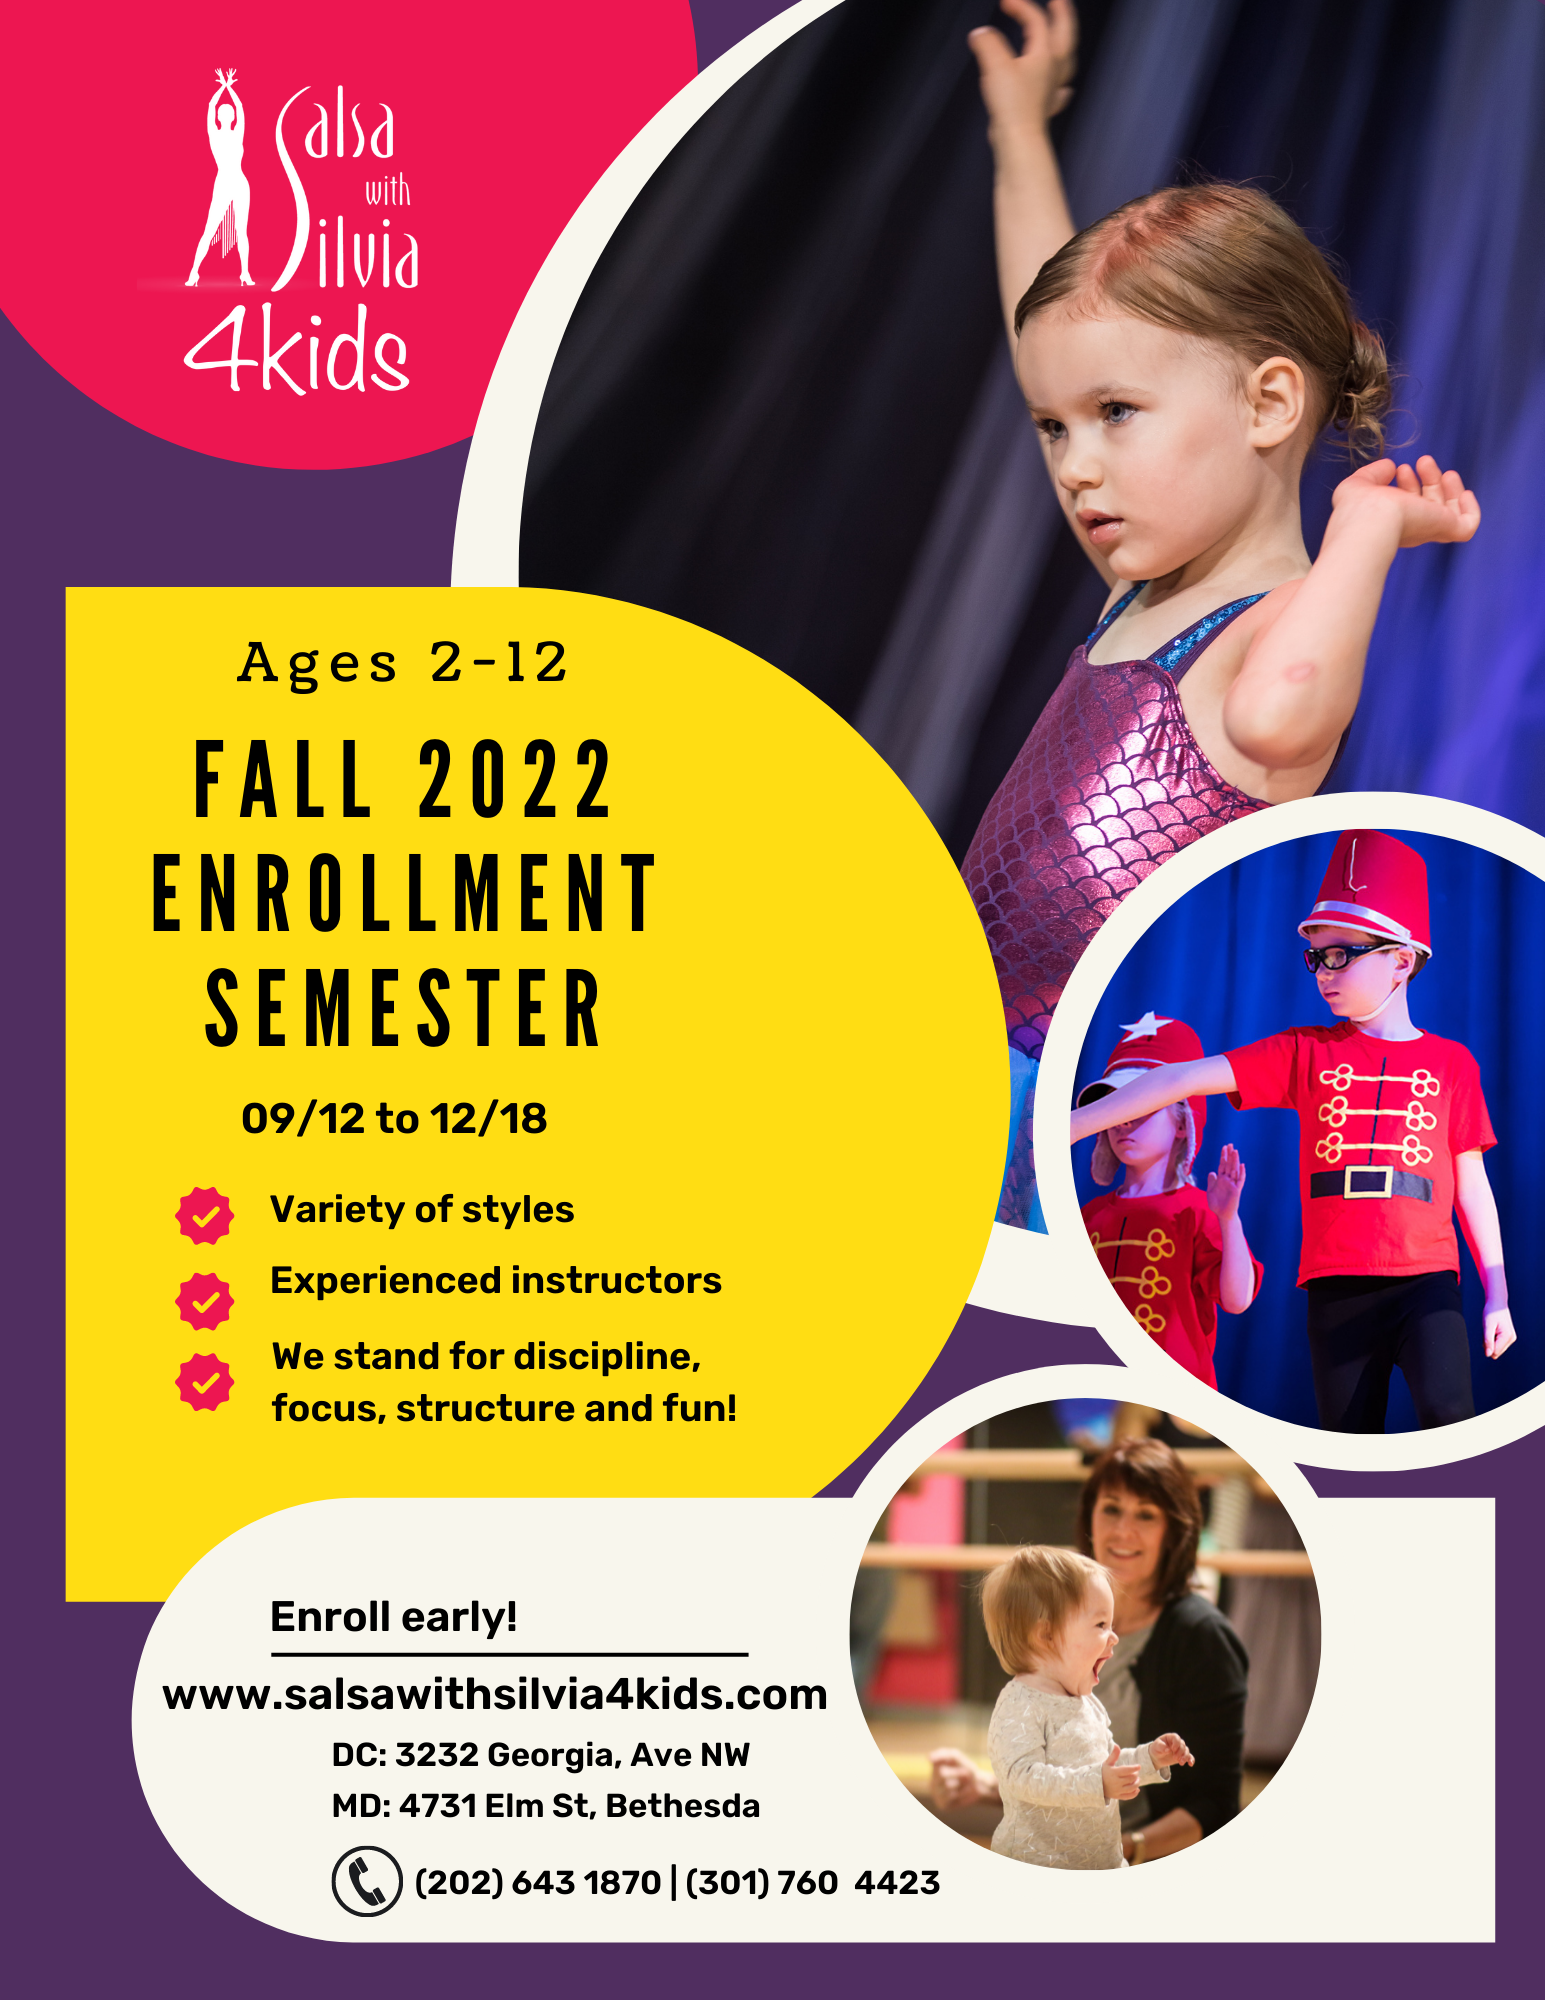 Fall Semester 2022 Dance Classes For Kids in DC and Bethesda